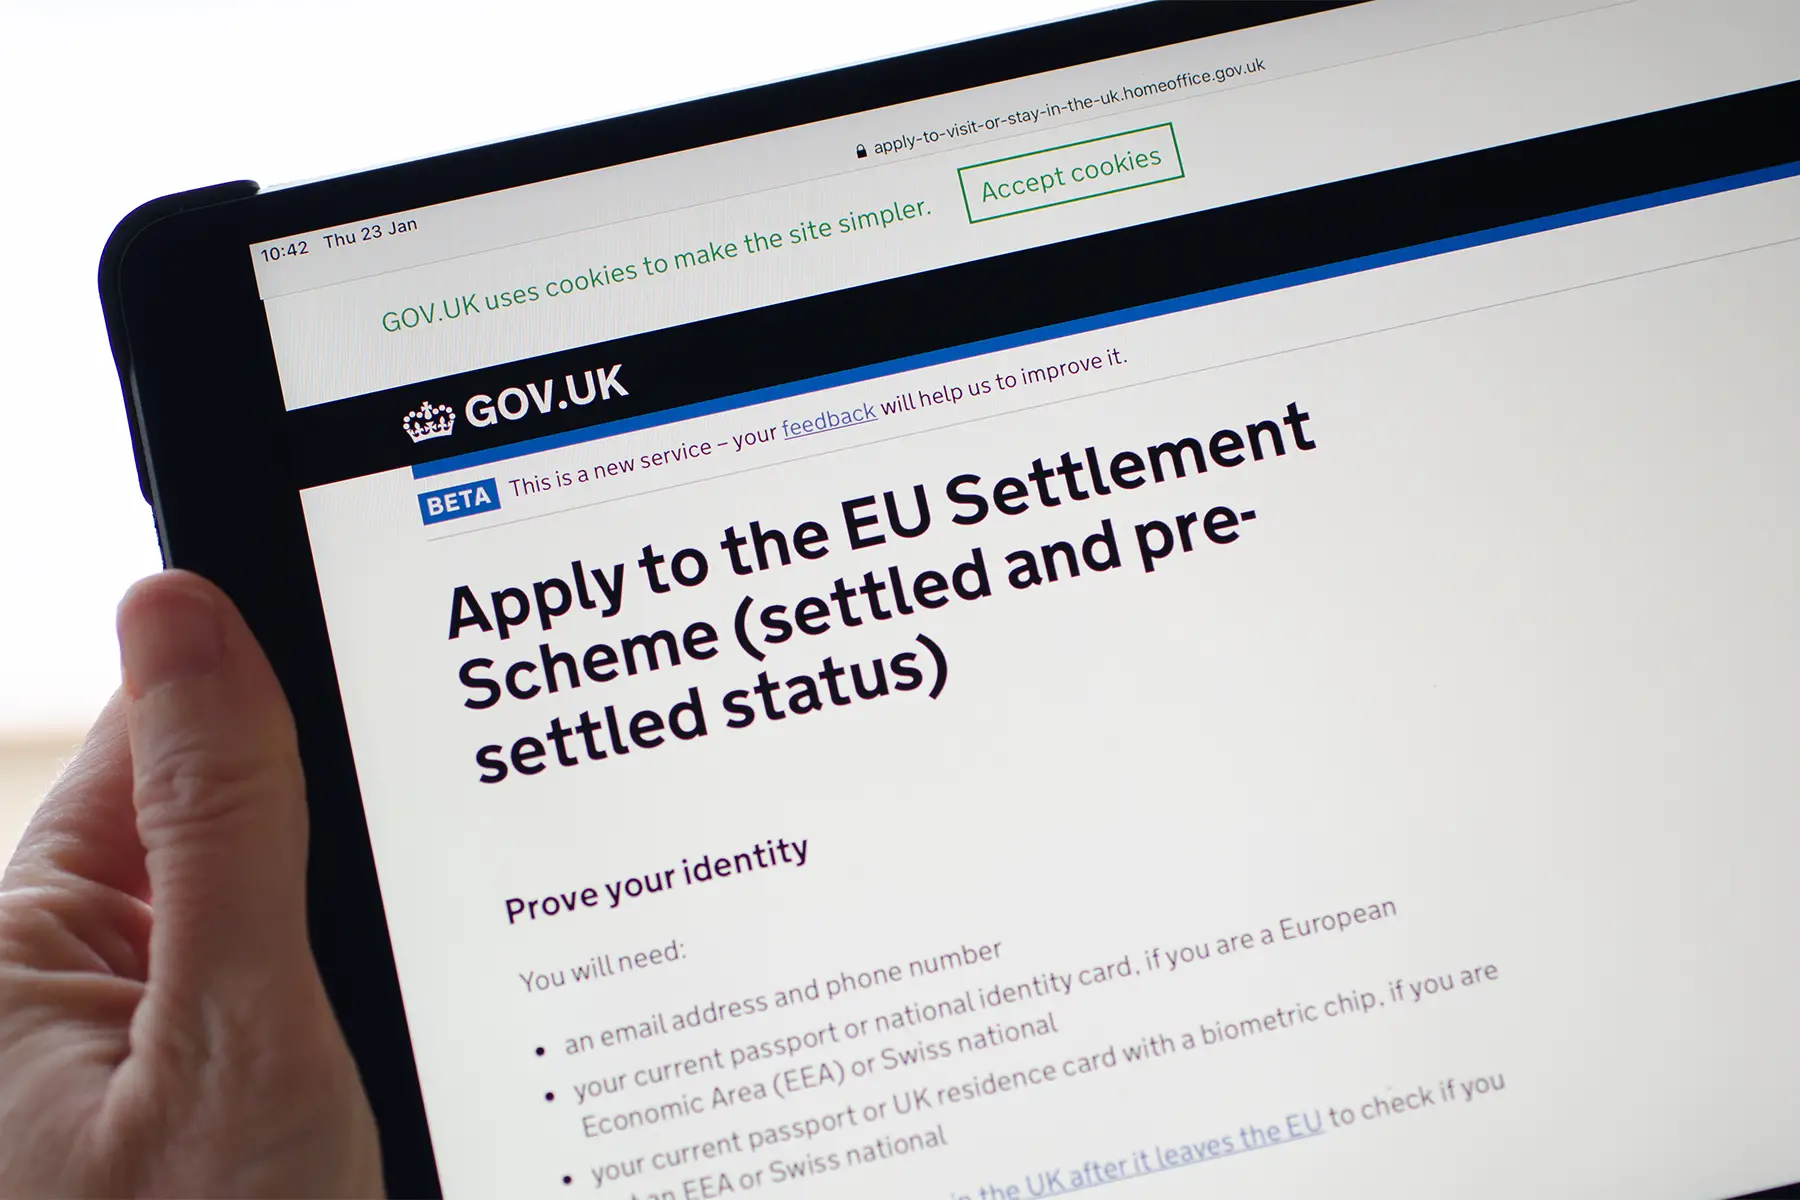 The application page on the Goverment website showing how to apply for the EU Settlement Scheme in the UK